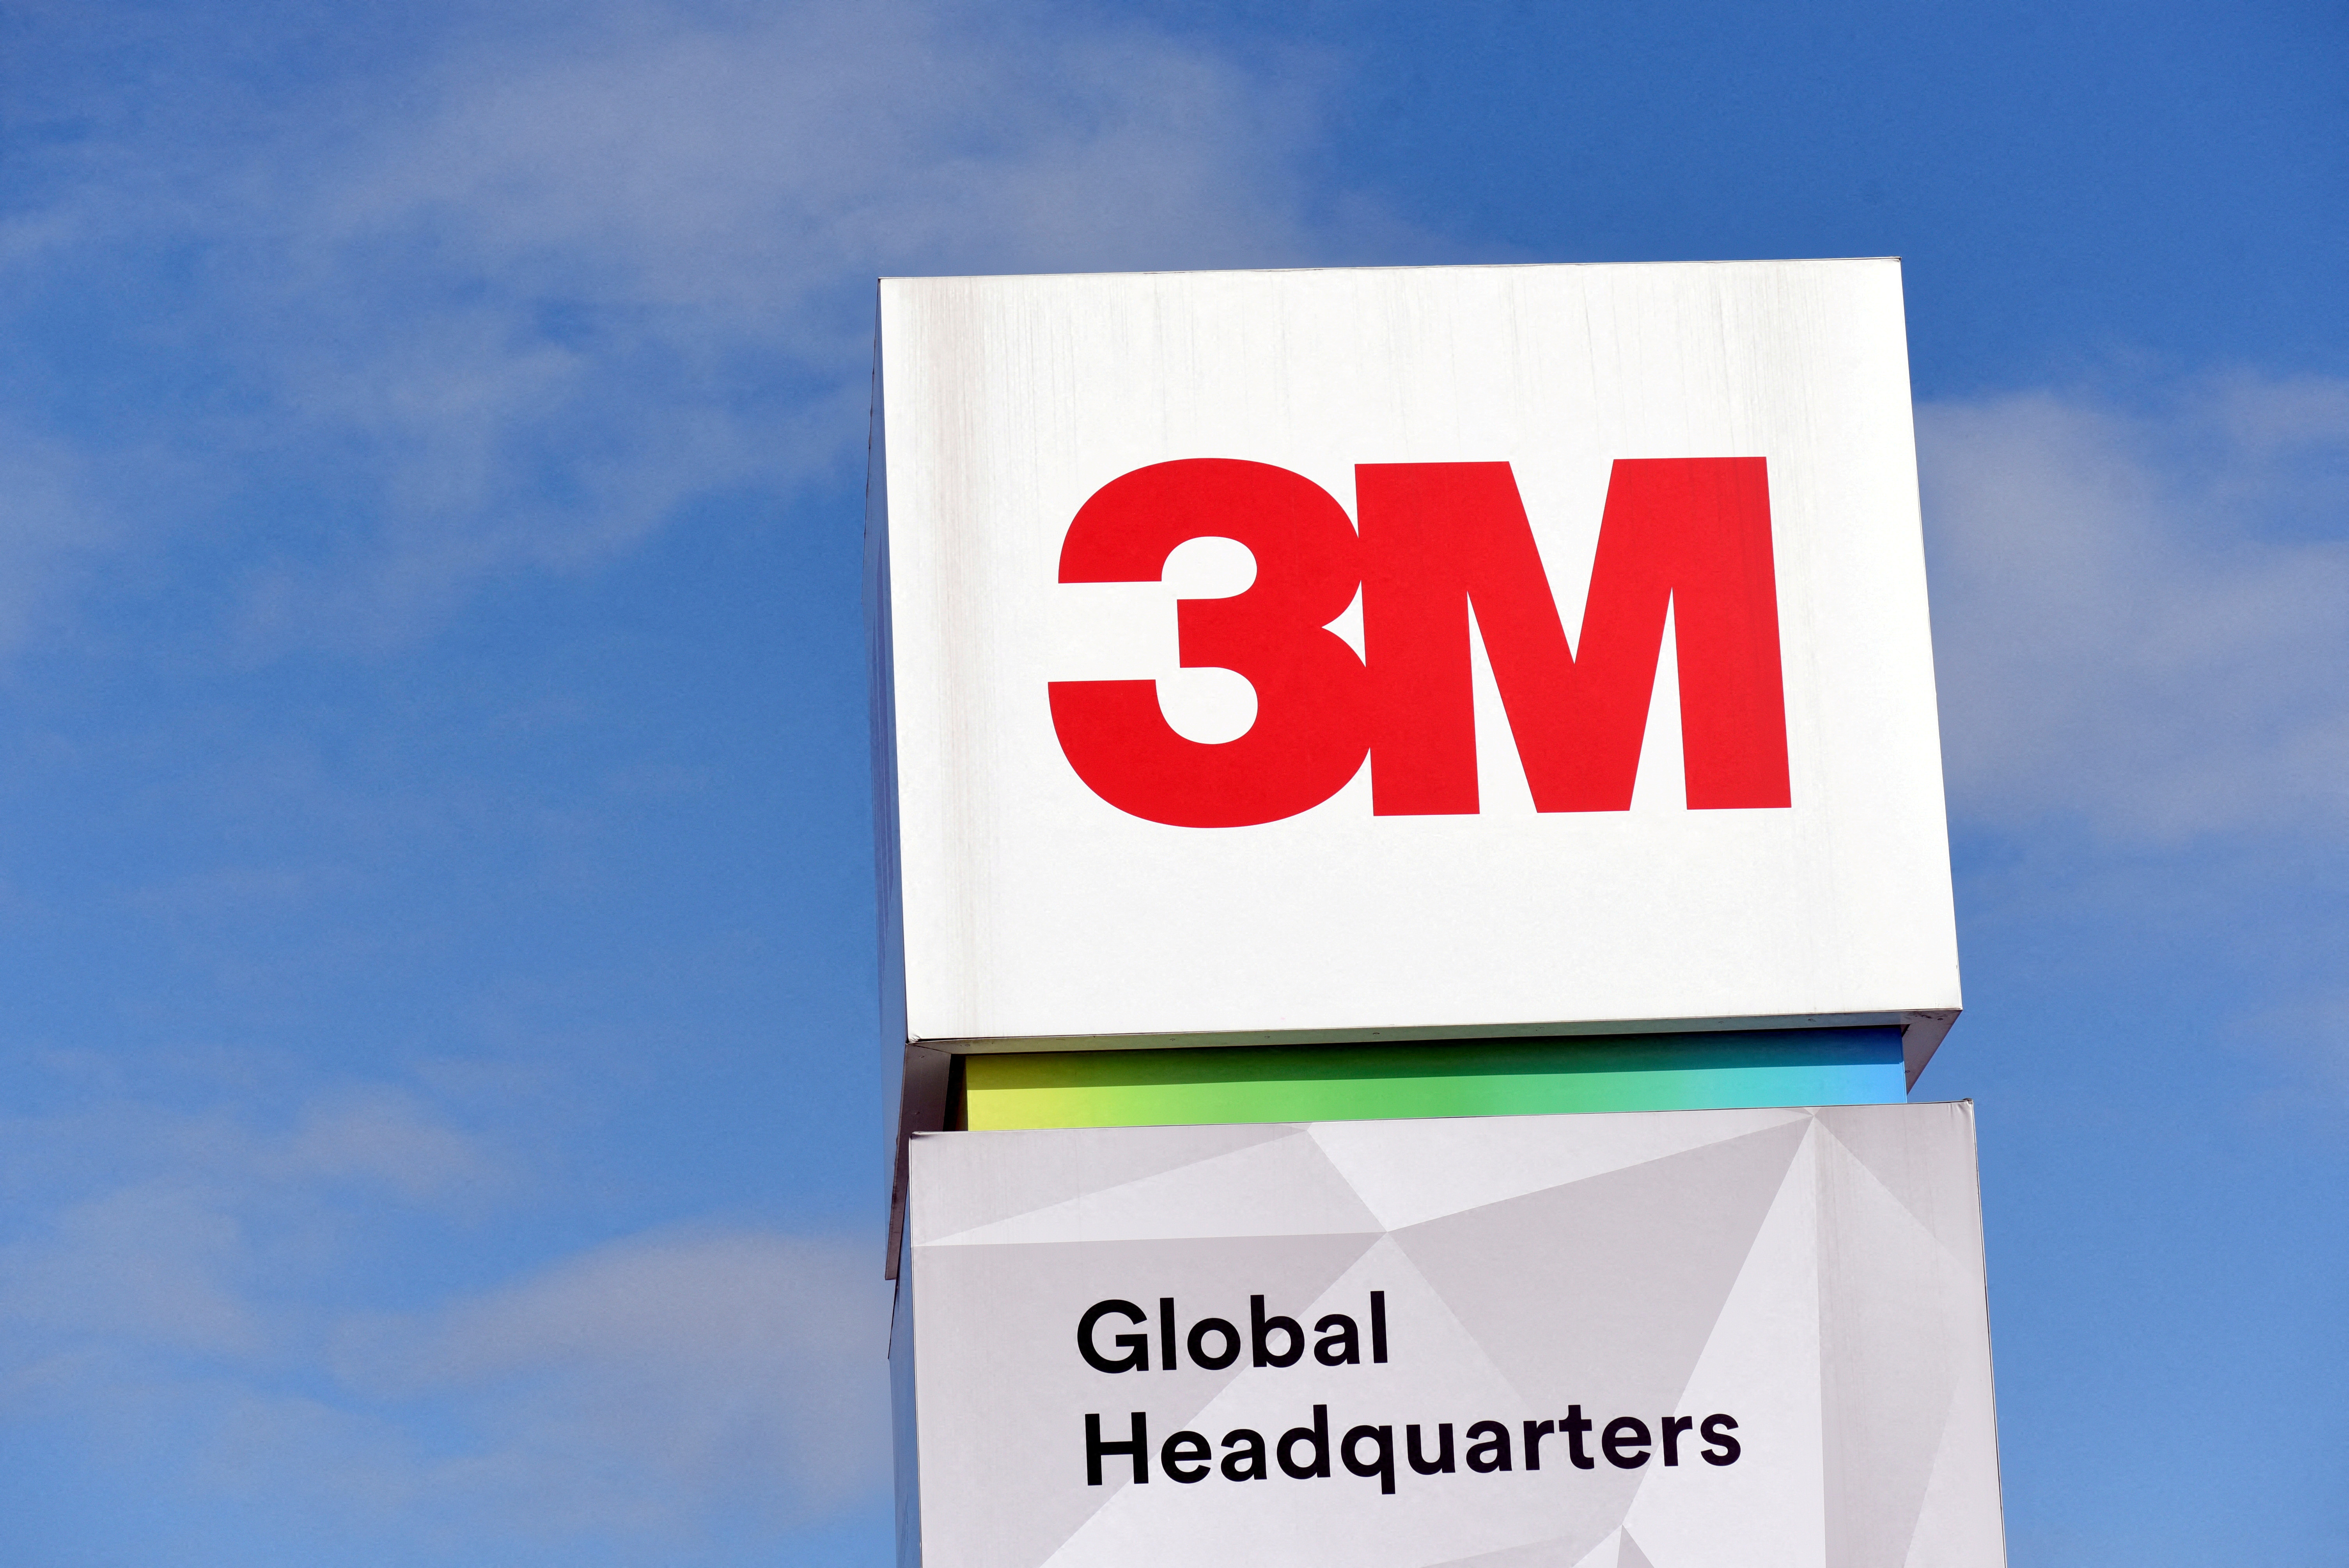 3M to Stop Making, Discontinue Use of 'Forever Chemicals' - WSJ